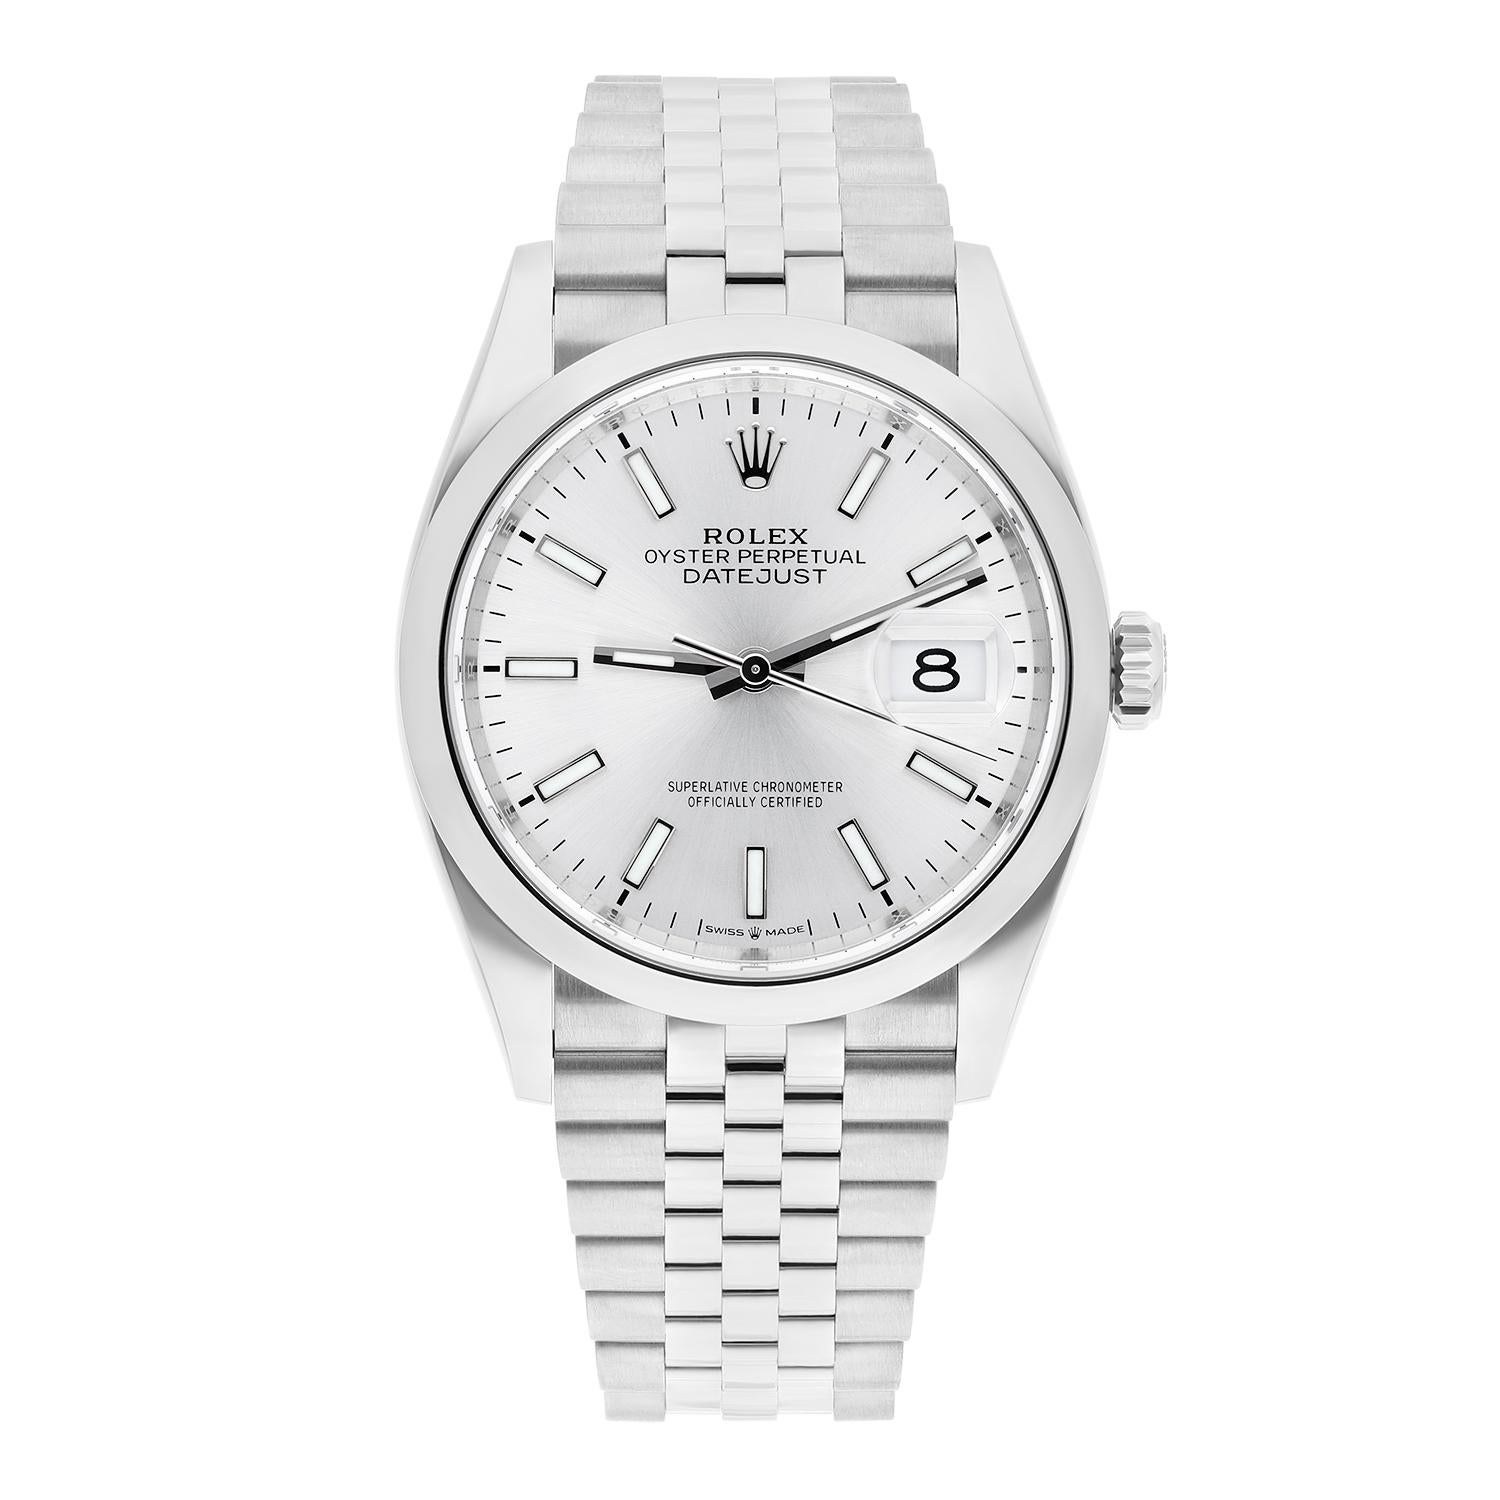 This Rolex Datejust 36mm Jubilee Steel Silver Dial Automatic Mens Watch 126200 is a luxurious timepiece with a Swiss-made mechanical automatic movement. It features a fixed smooth bezel, sunburst dial pattern with stick indexes and luminous hands,